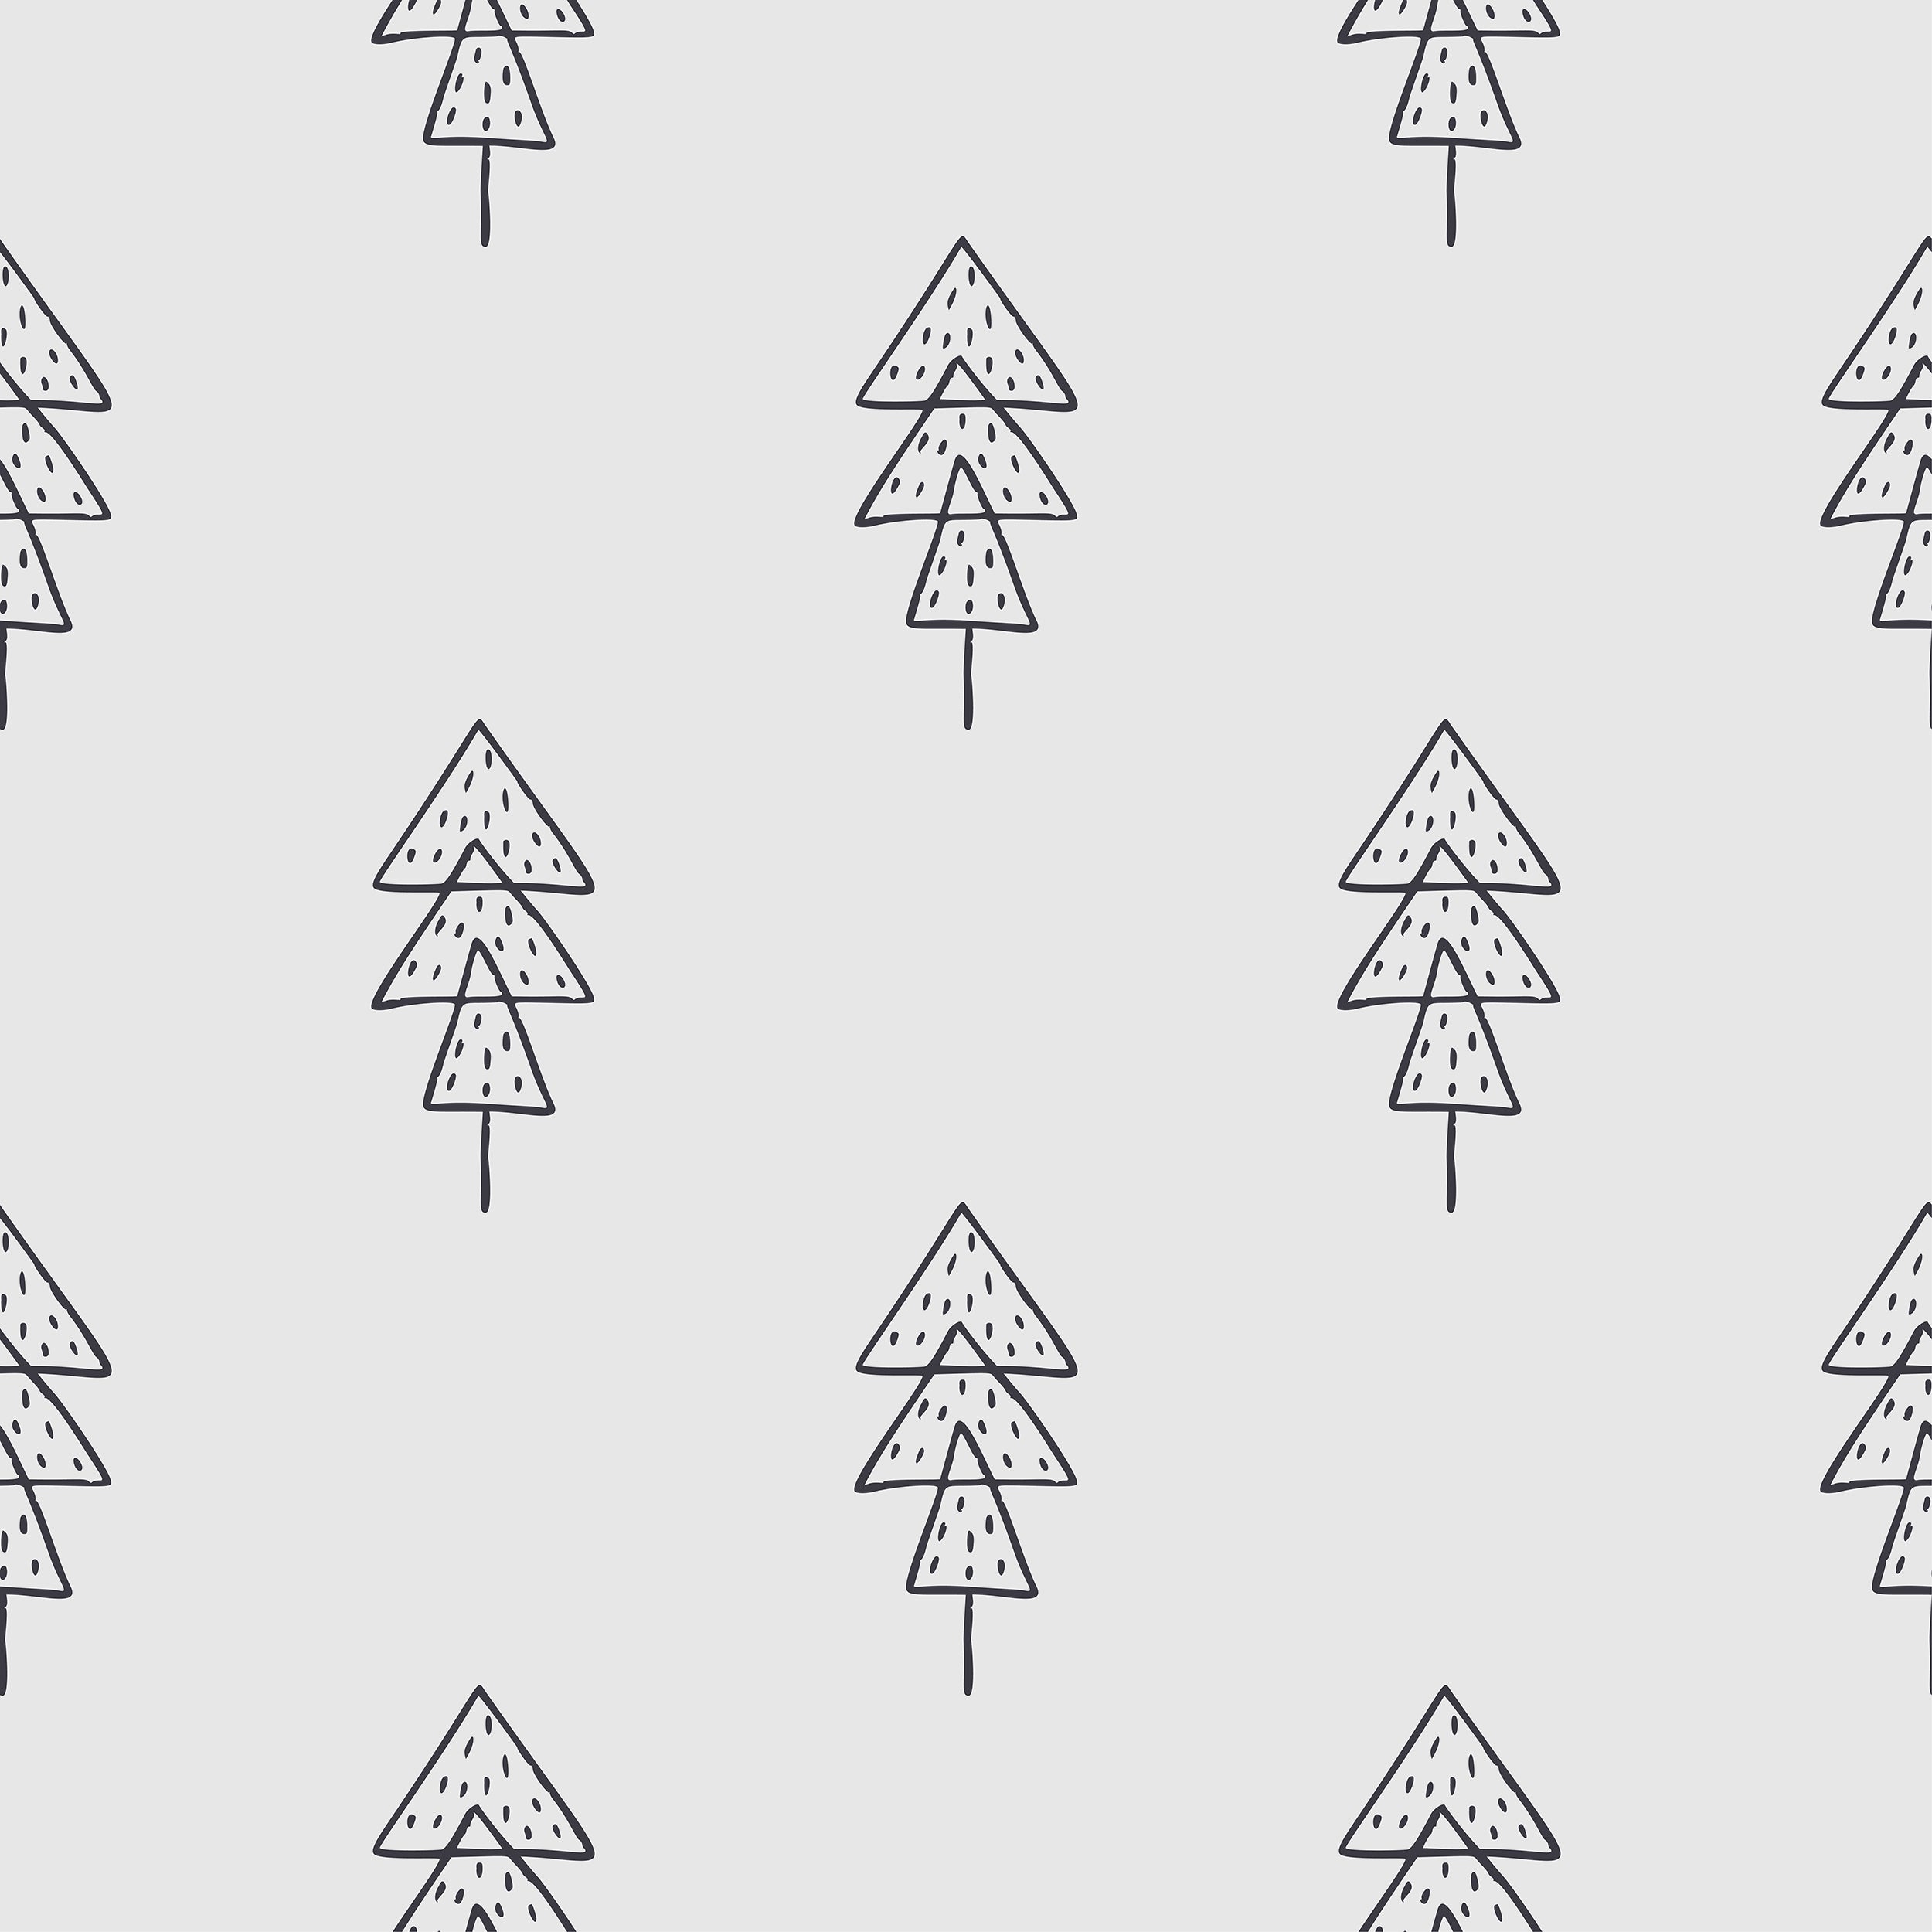 A simplistic and charming wallpaper pattern featuring black and white line-drawn pine trees evenly spaced on a clean, white background. Each tree is stylized with geometric shapes, conveying a modern Scandinavian design aesthetic suitable for a nursery or minimalistic living space.